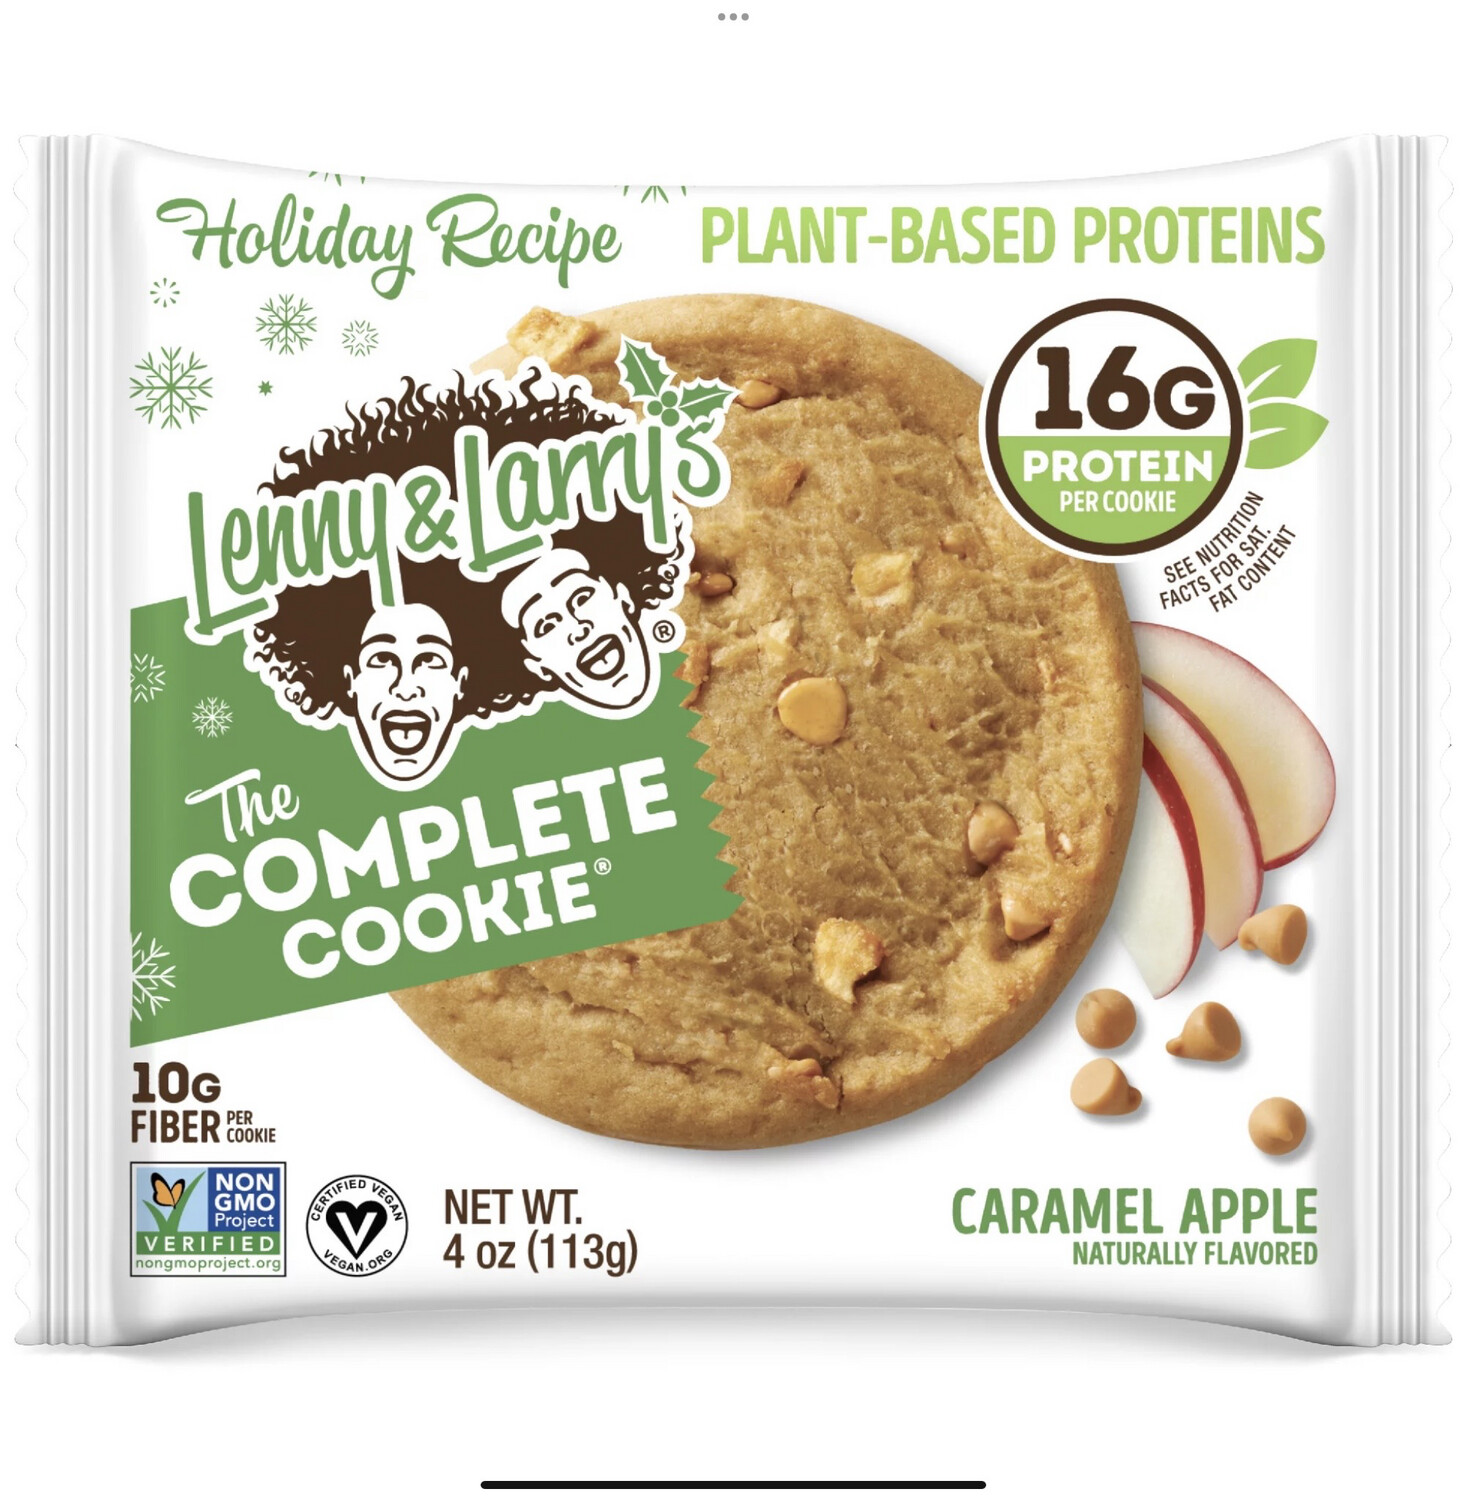 Lenny & Larry’s The Complete Cookie Caramel Apple 16 g Protein 